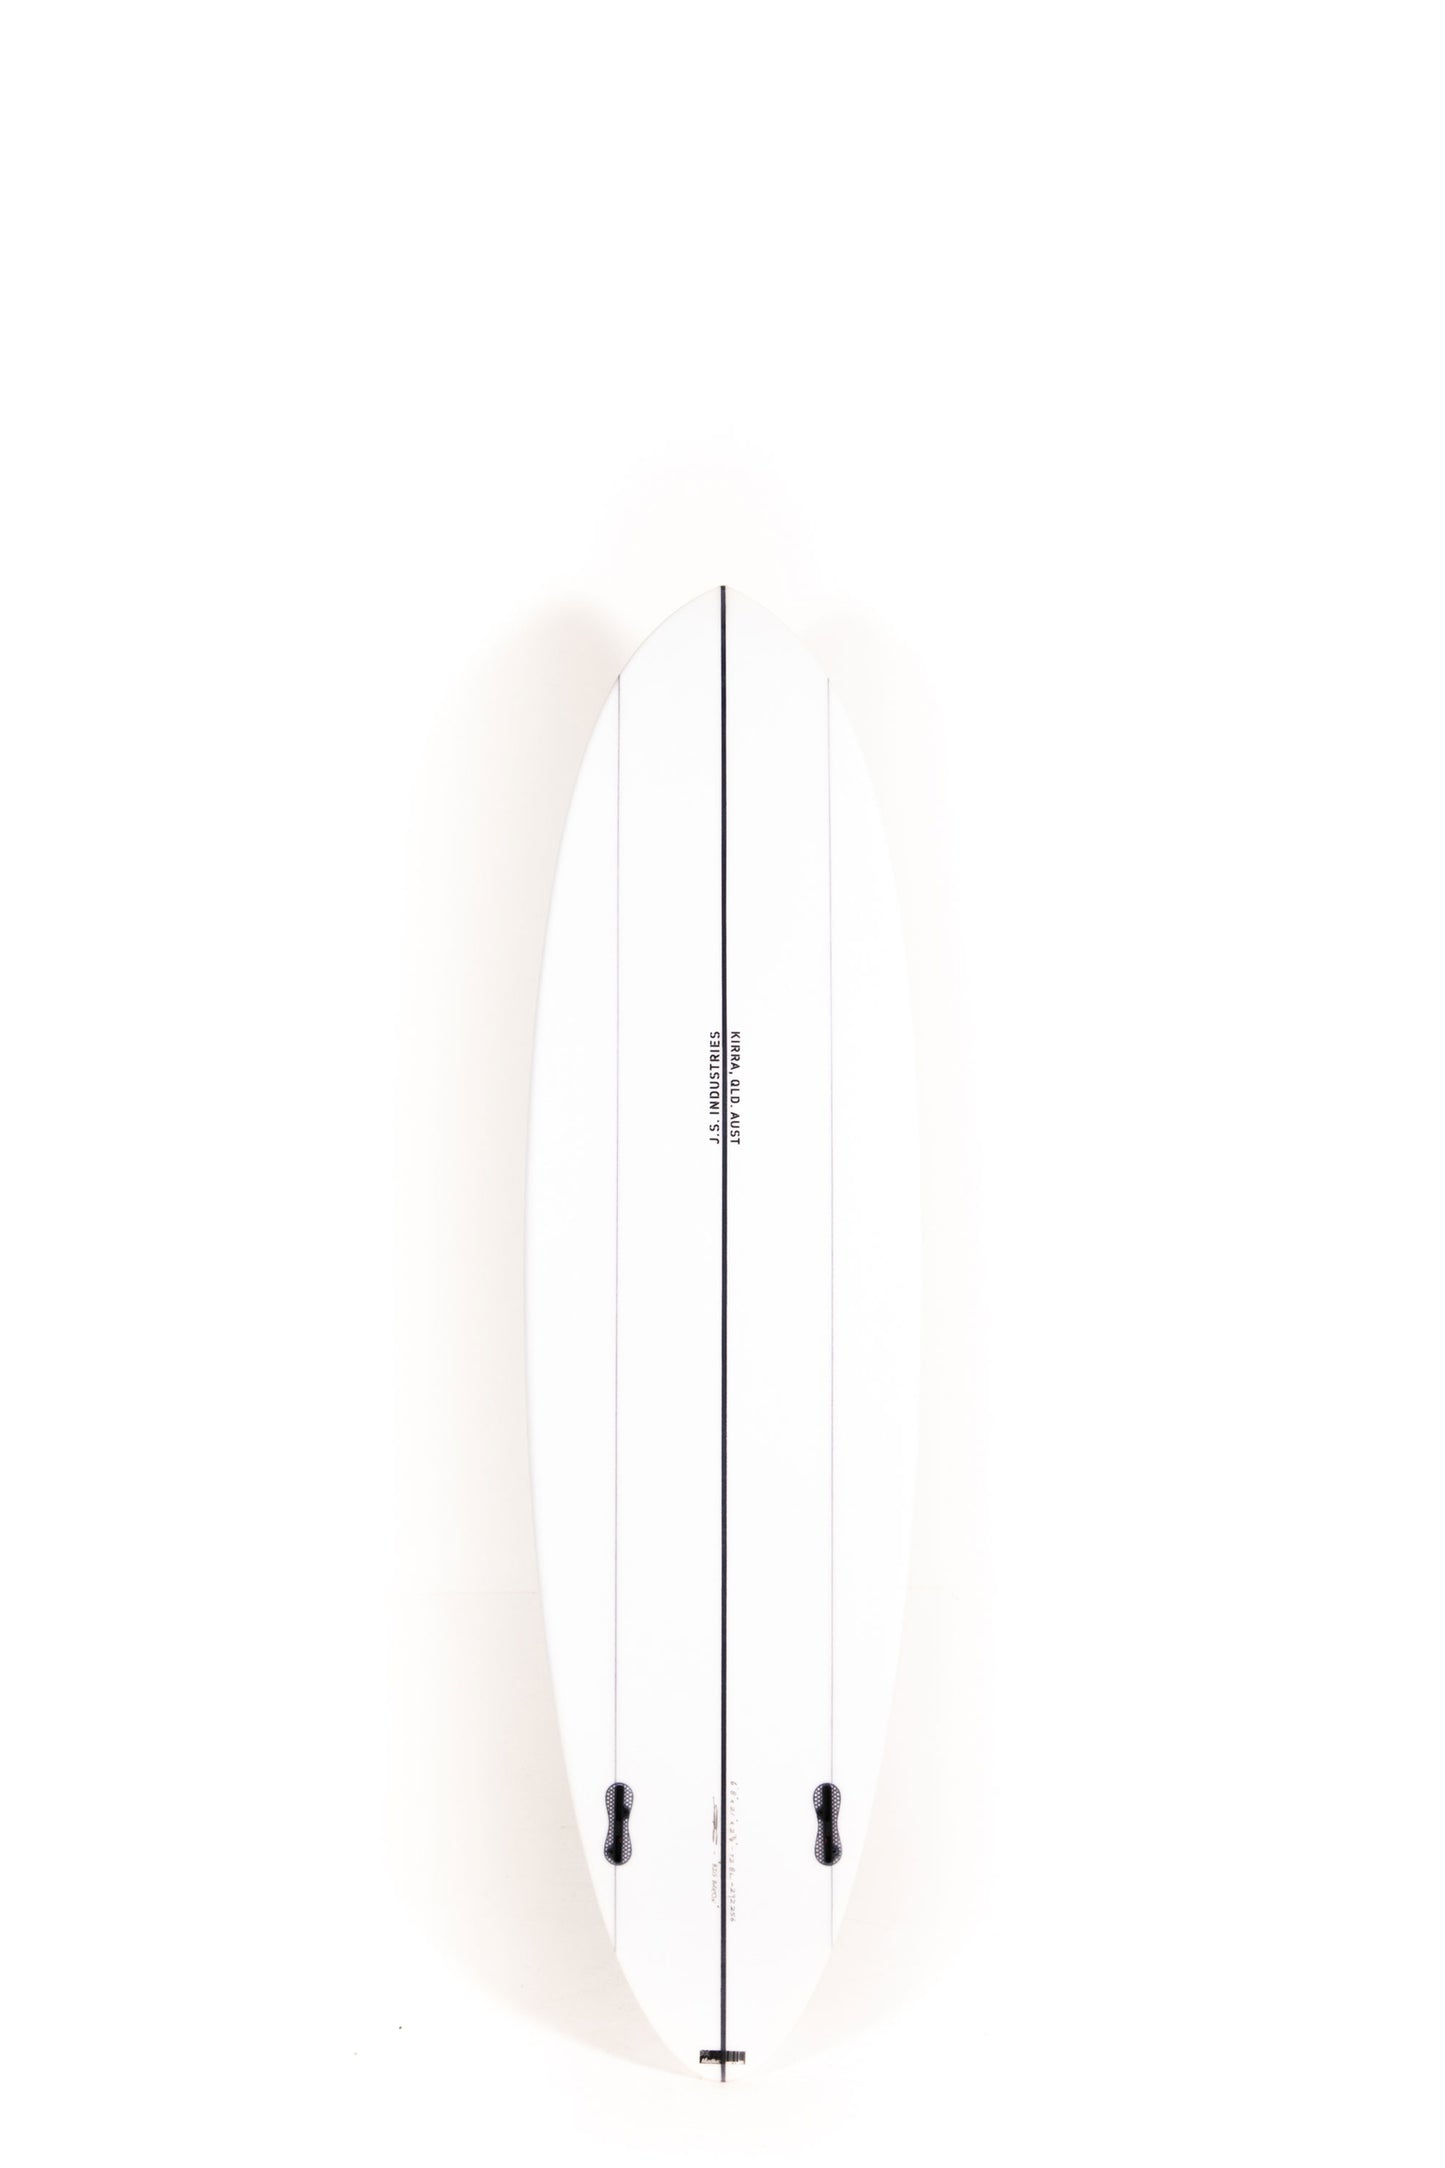 MID LENGTH SURFBOARDS | Available online at PUKAS SURF SHOP – Page 2